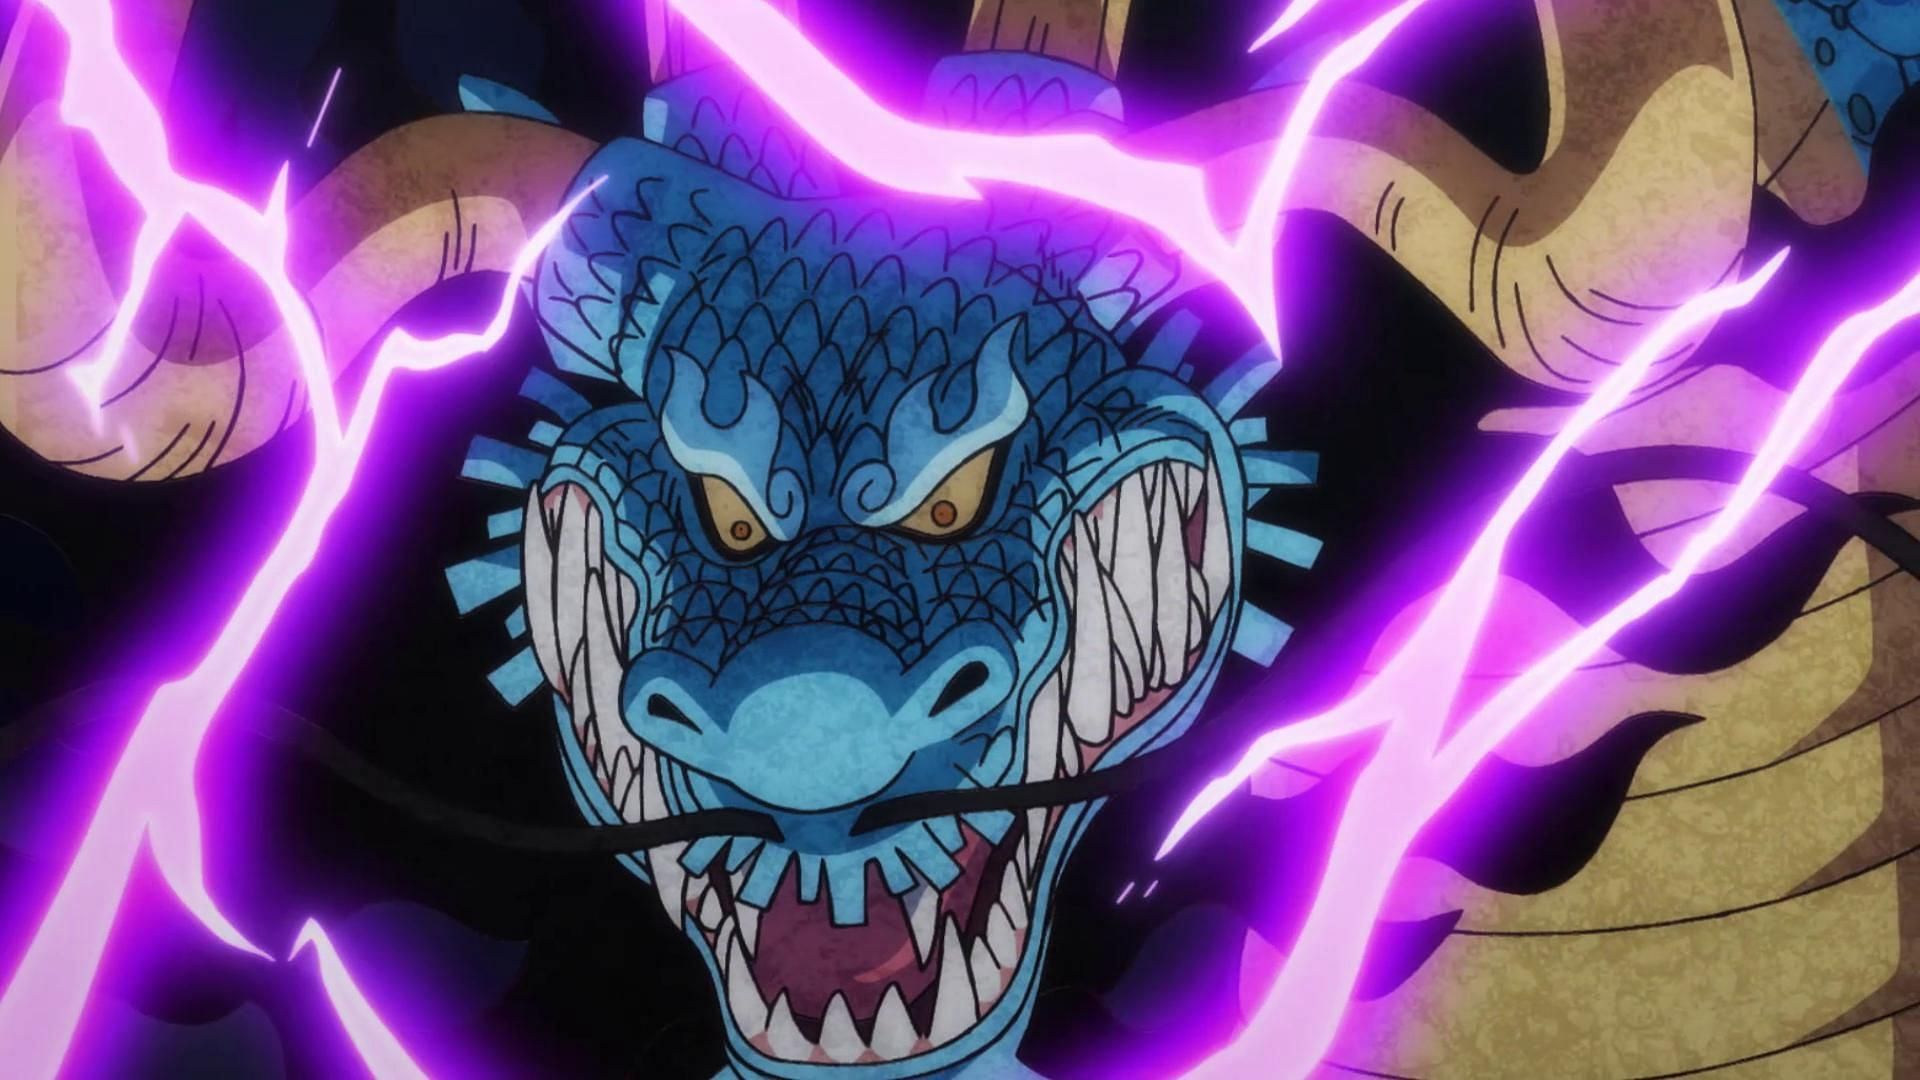 The Fish-Fish Fruit, Model: Azure Dragon as seen in One Piece (Image via Toei Animation)